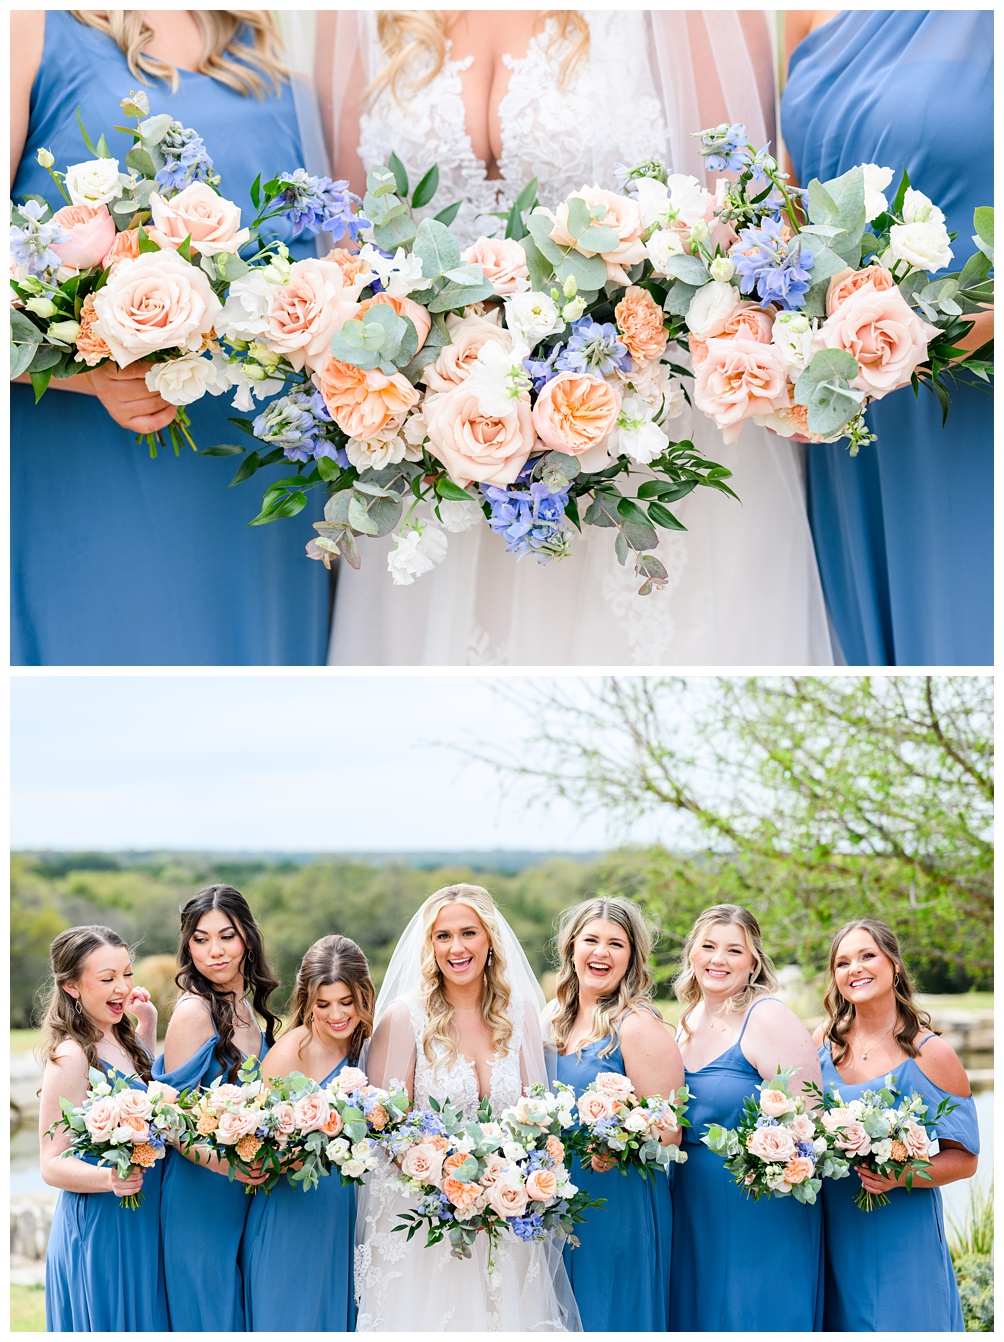 Laurel & Finch Bridesmaids Bouquets in dusty blue and blush